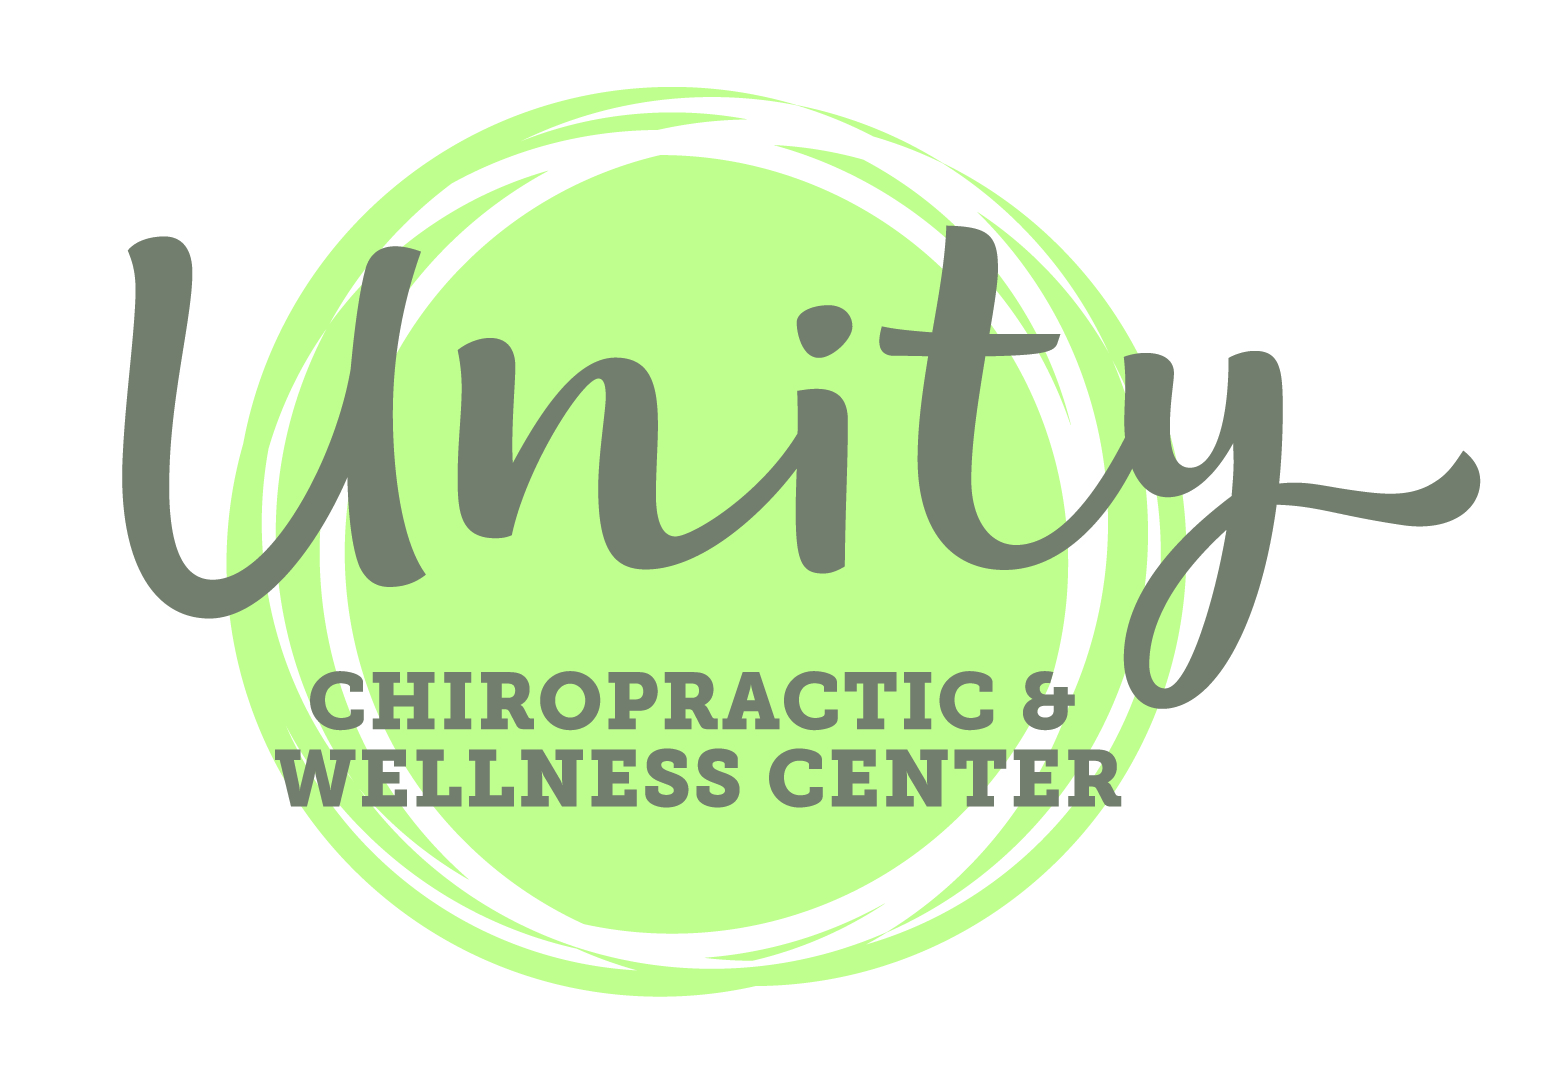 Unity Chiropractic and Wellness Center